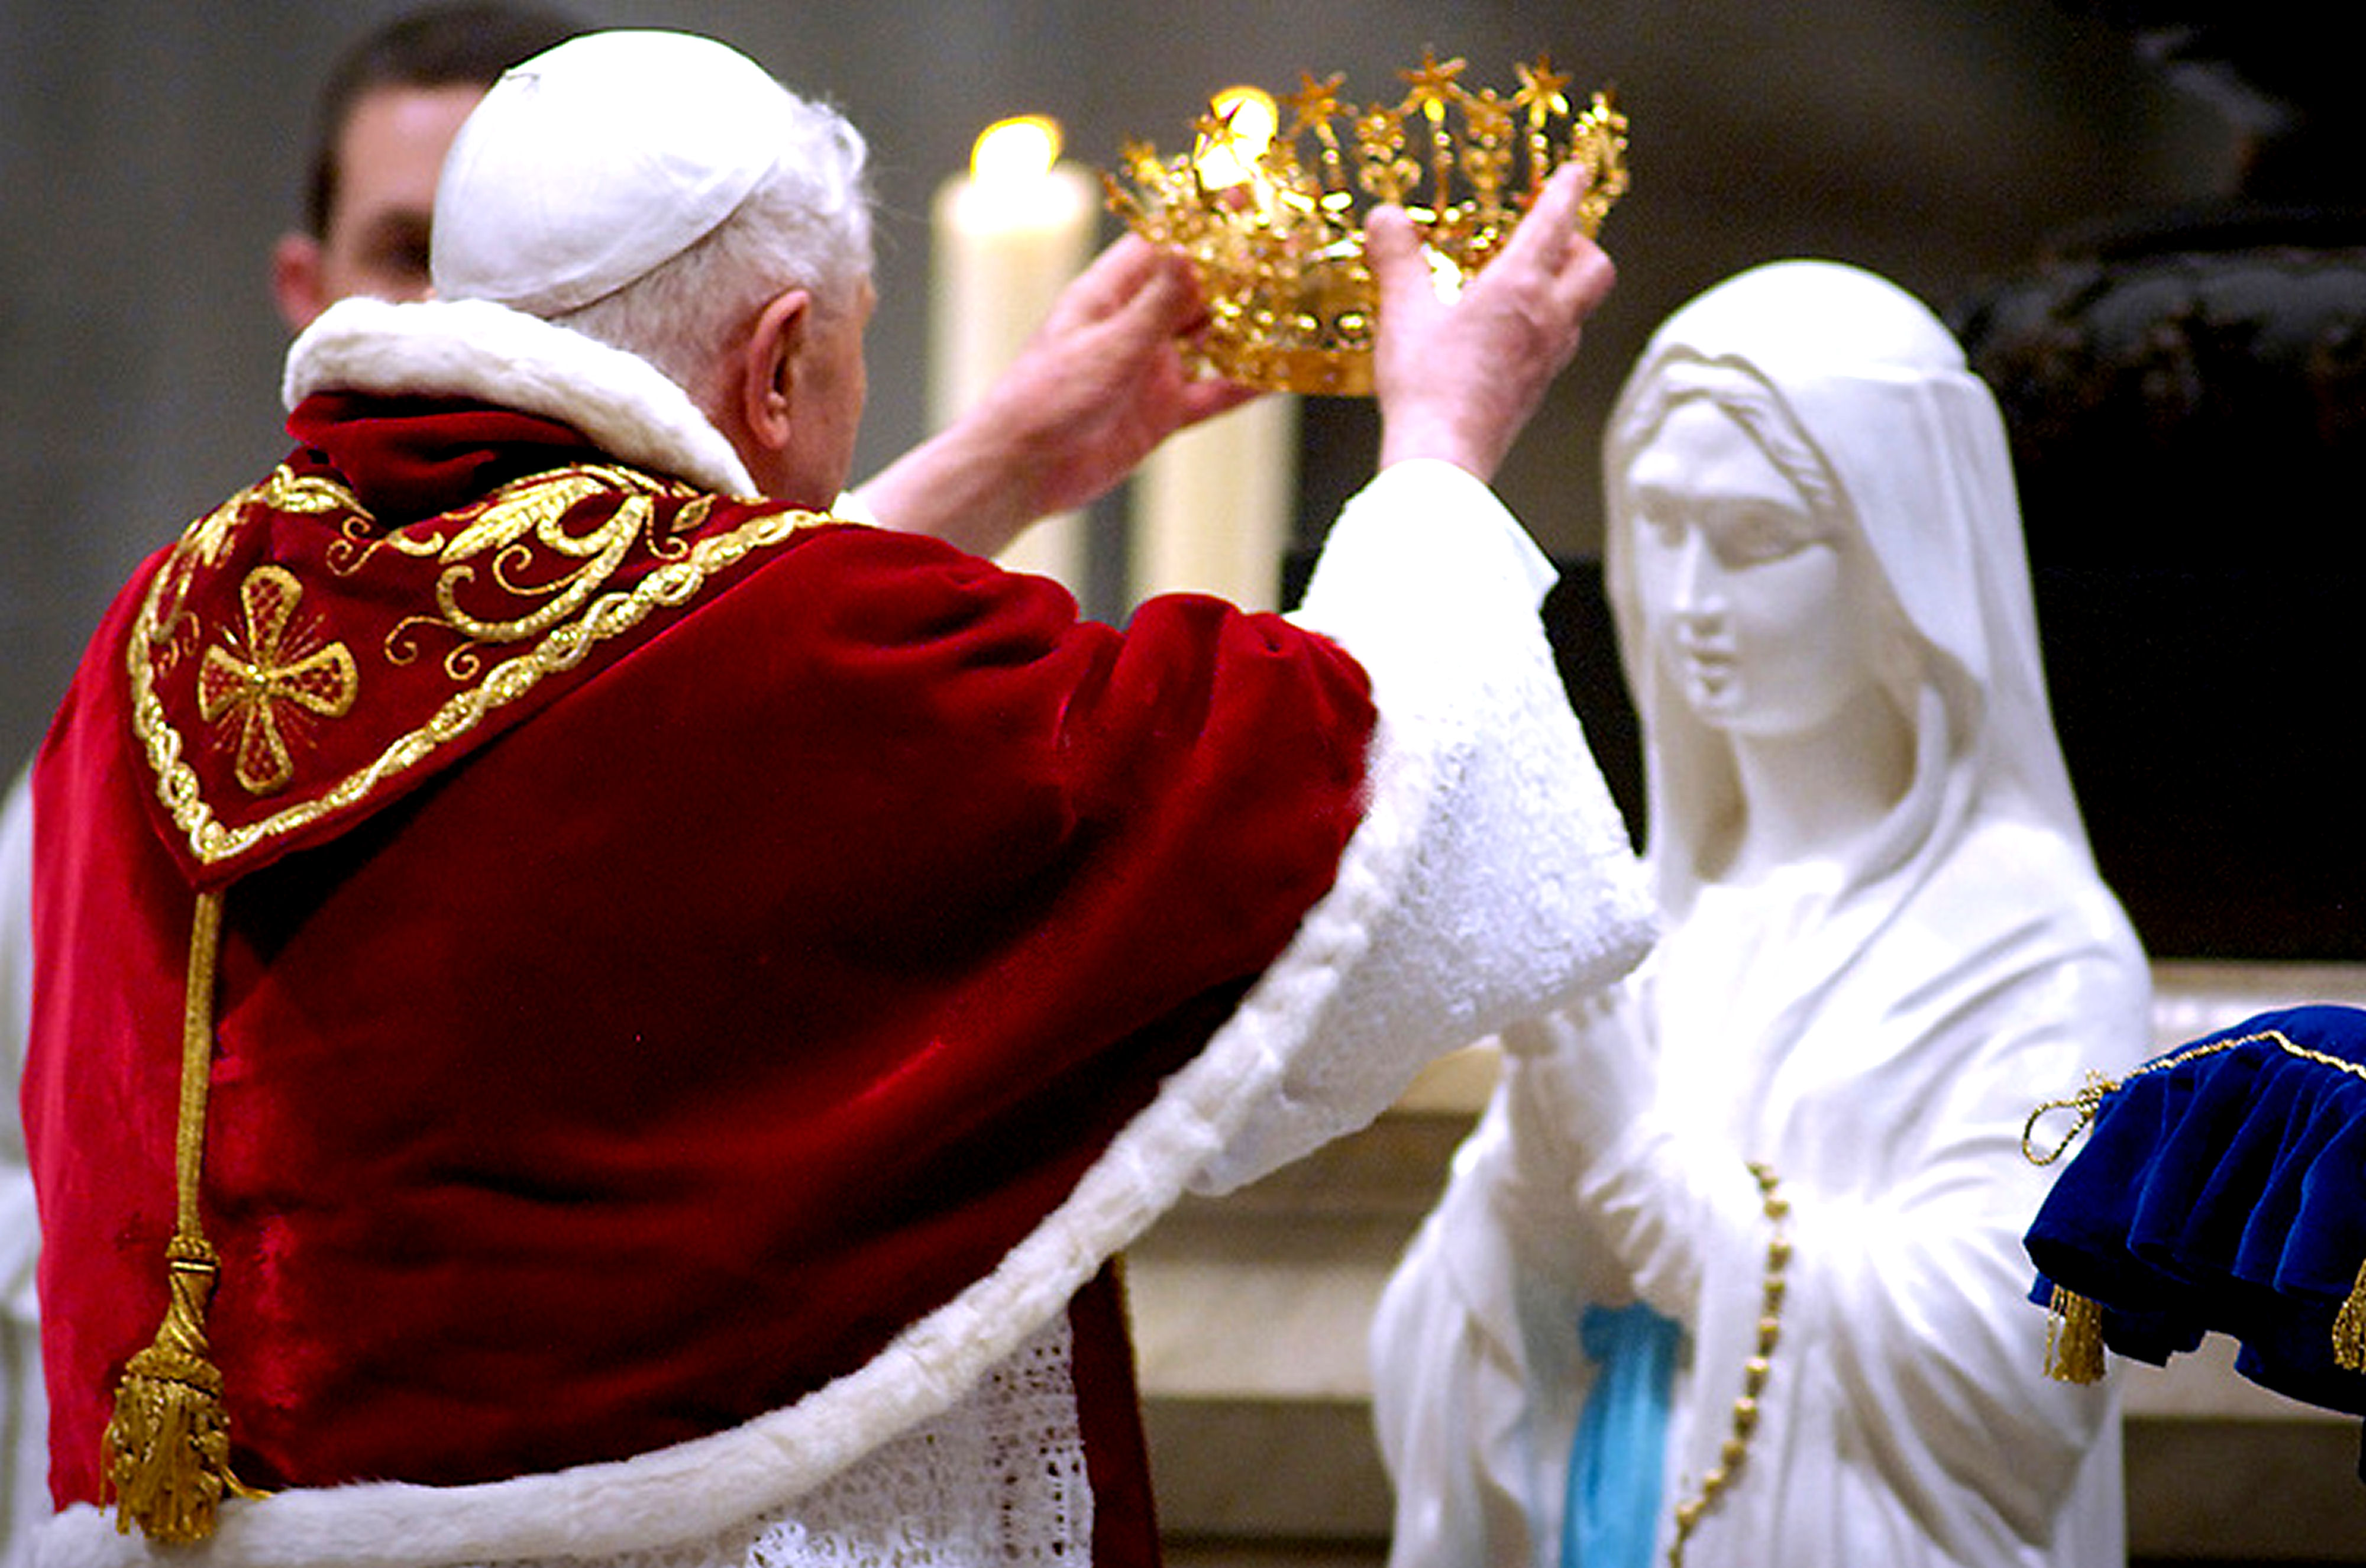 Pope_Benedict_XVI_placing_a_novelty_crown_on_Our_Lady_of_Lourdes_on_occasion_for_the_sick_pilgrims_11_February_2007.jpg